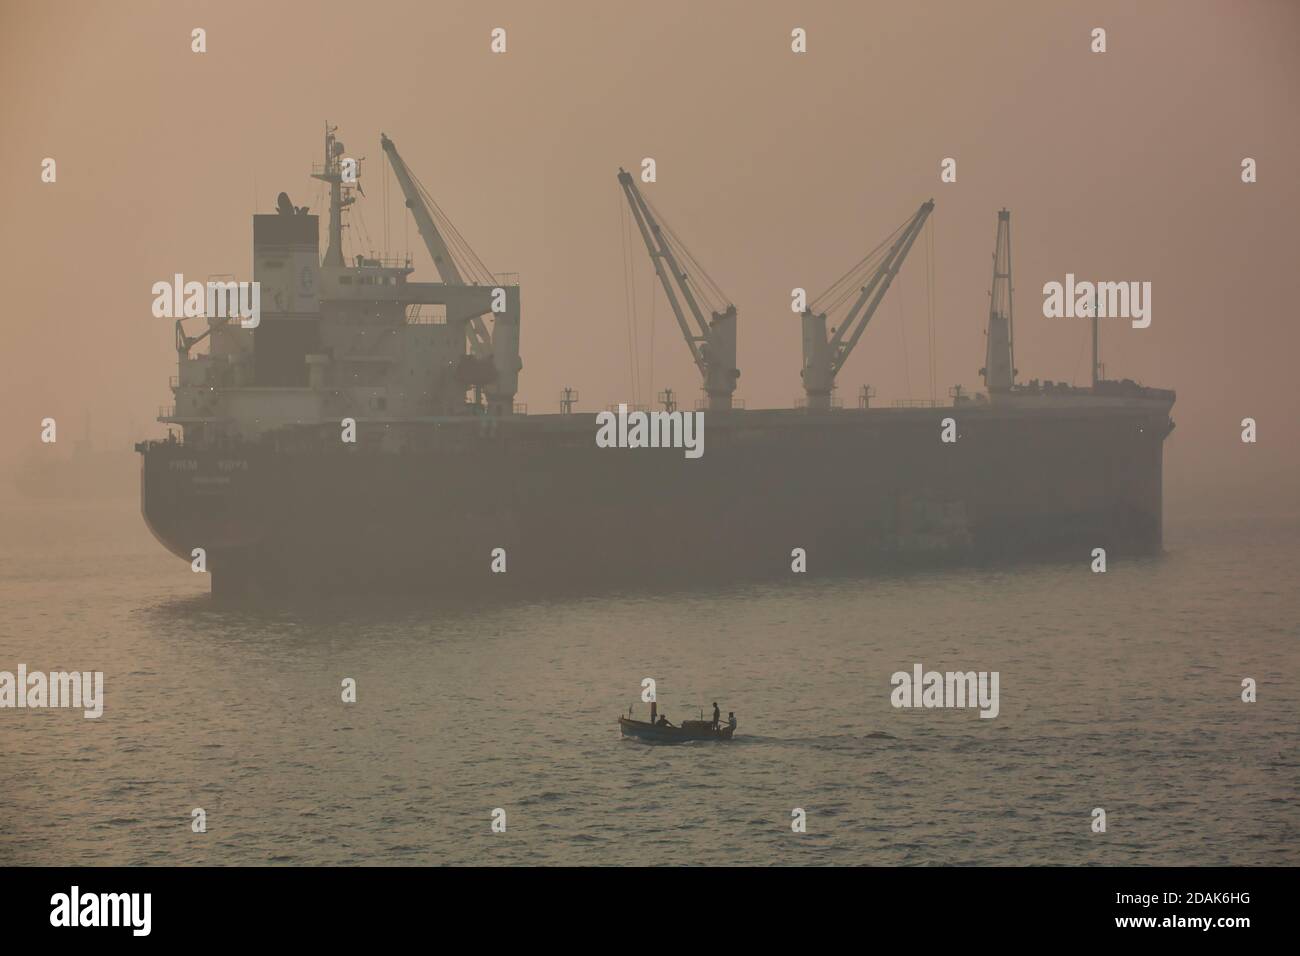 A small motor boat makes it's way across the sea off Mumbai harbour with a cargo ship in the background seen through an early morning haze, India Stock Photo